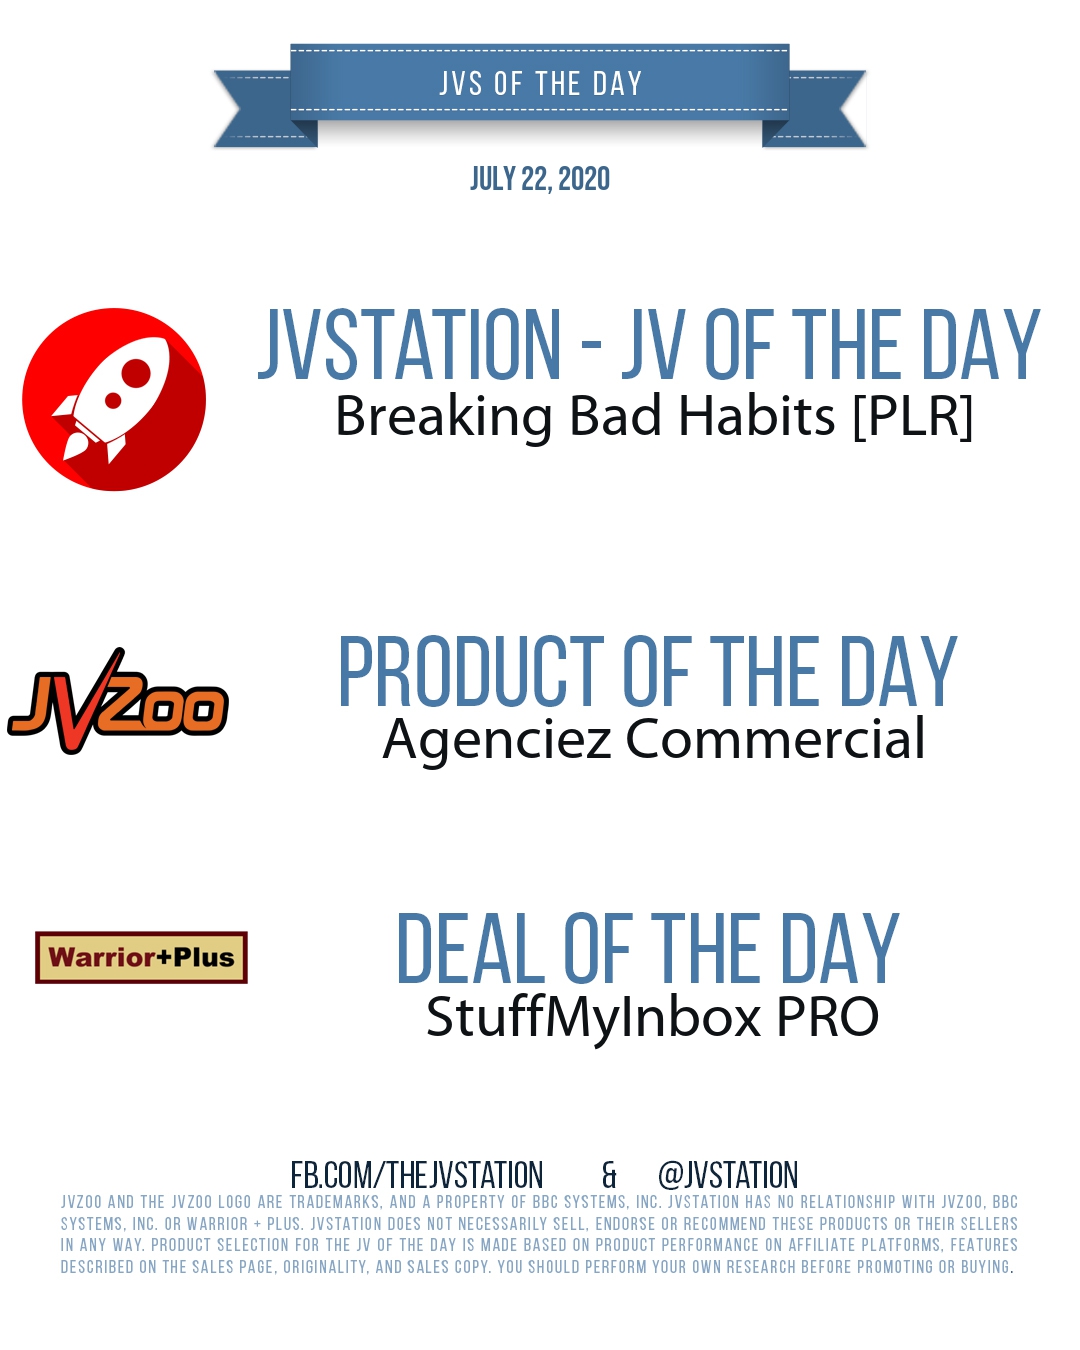 JVs of the day - July 22, 2020